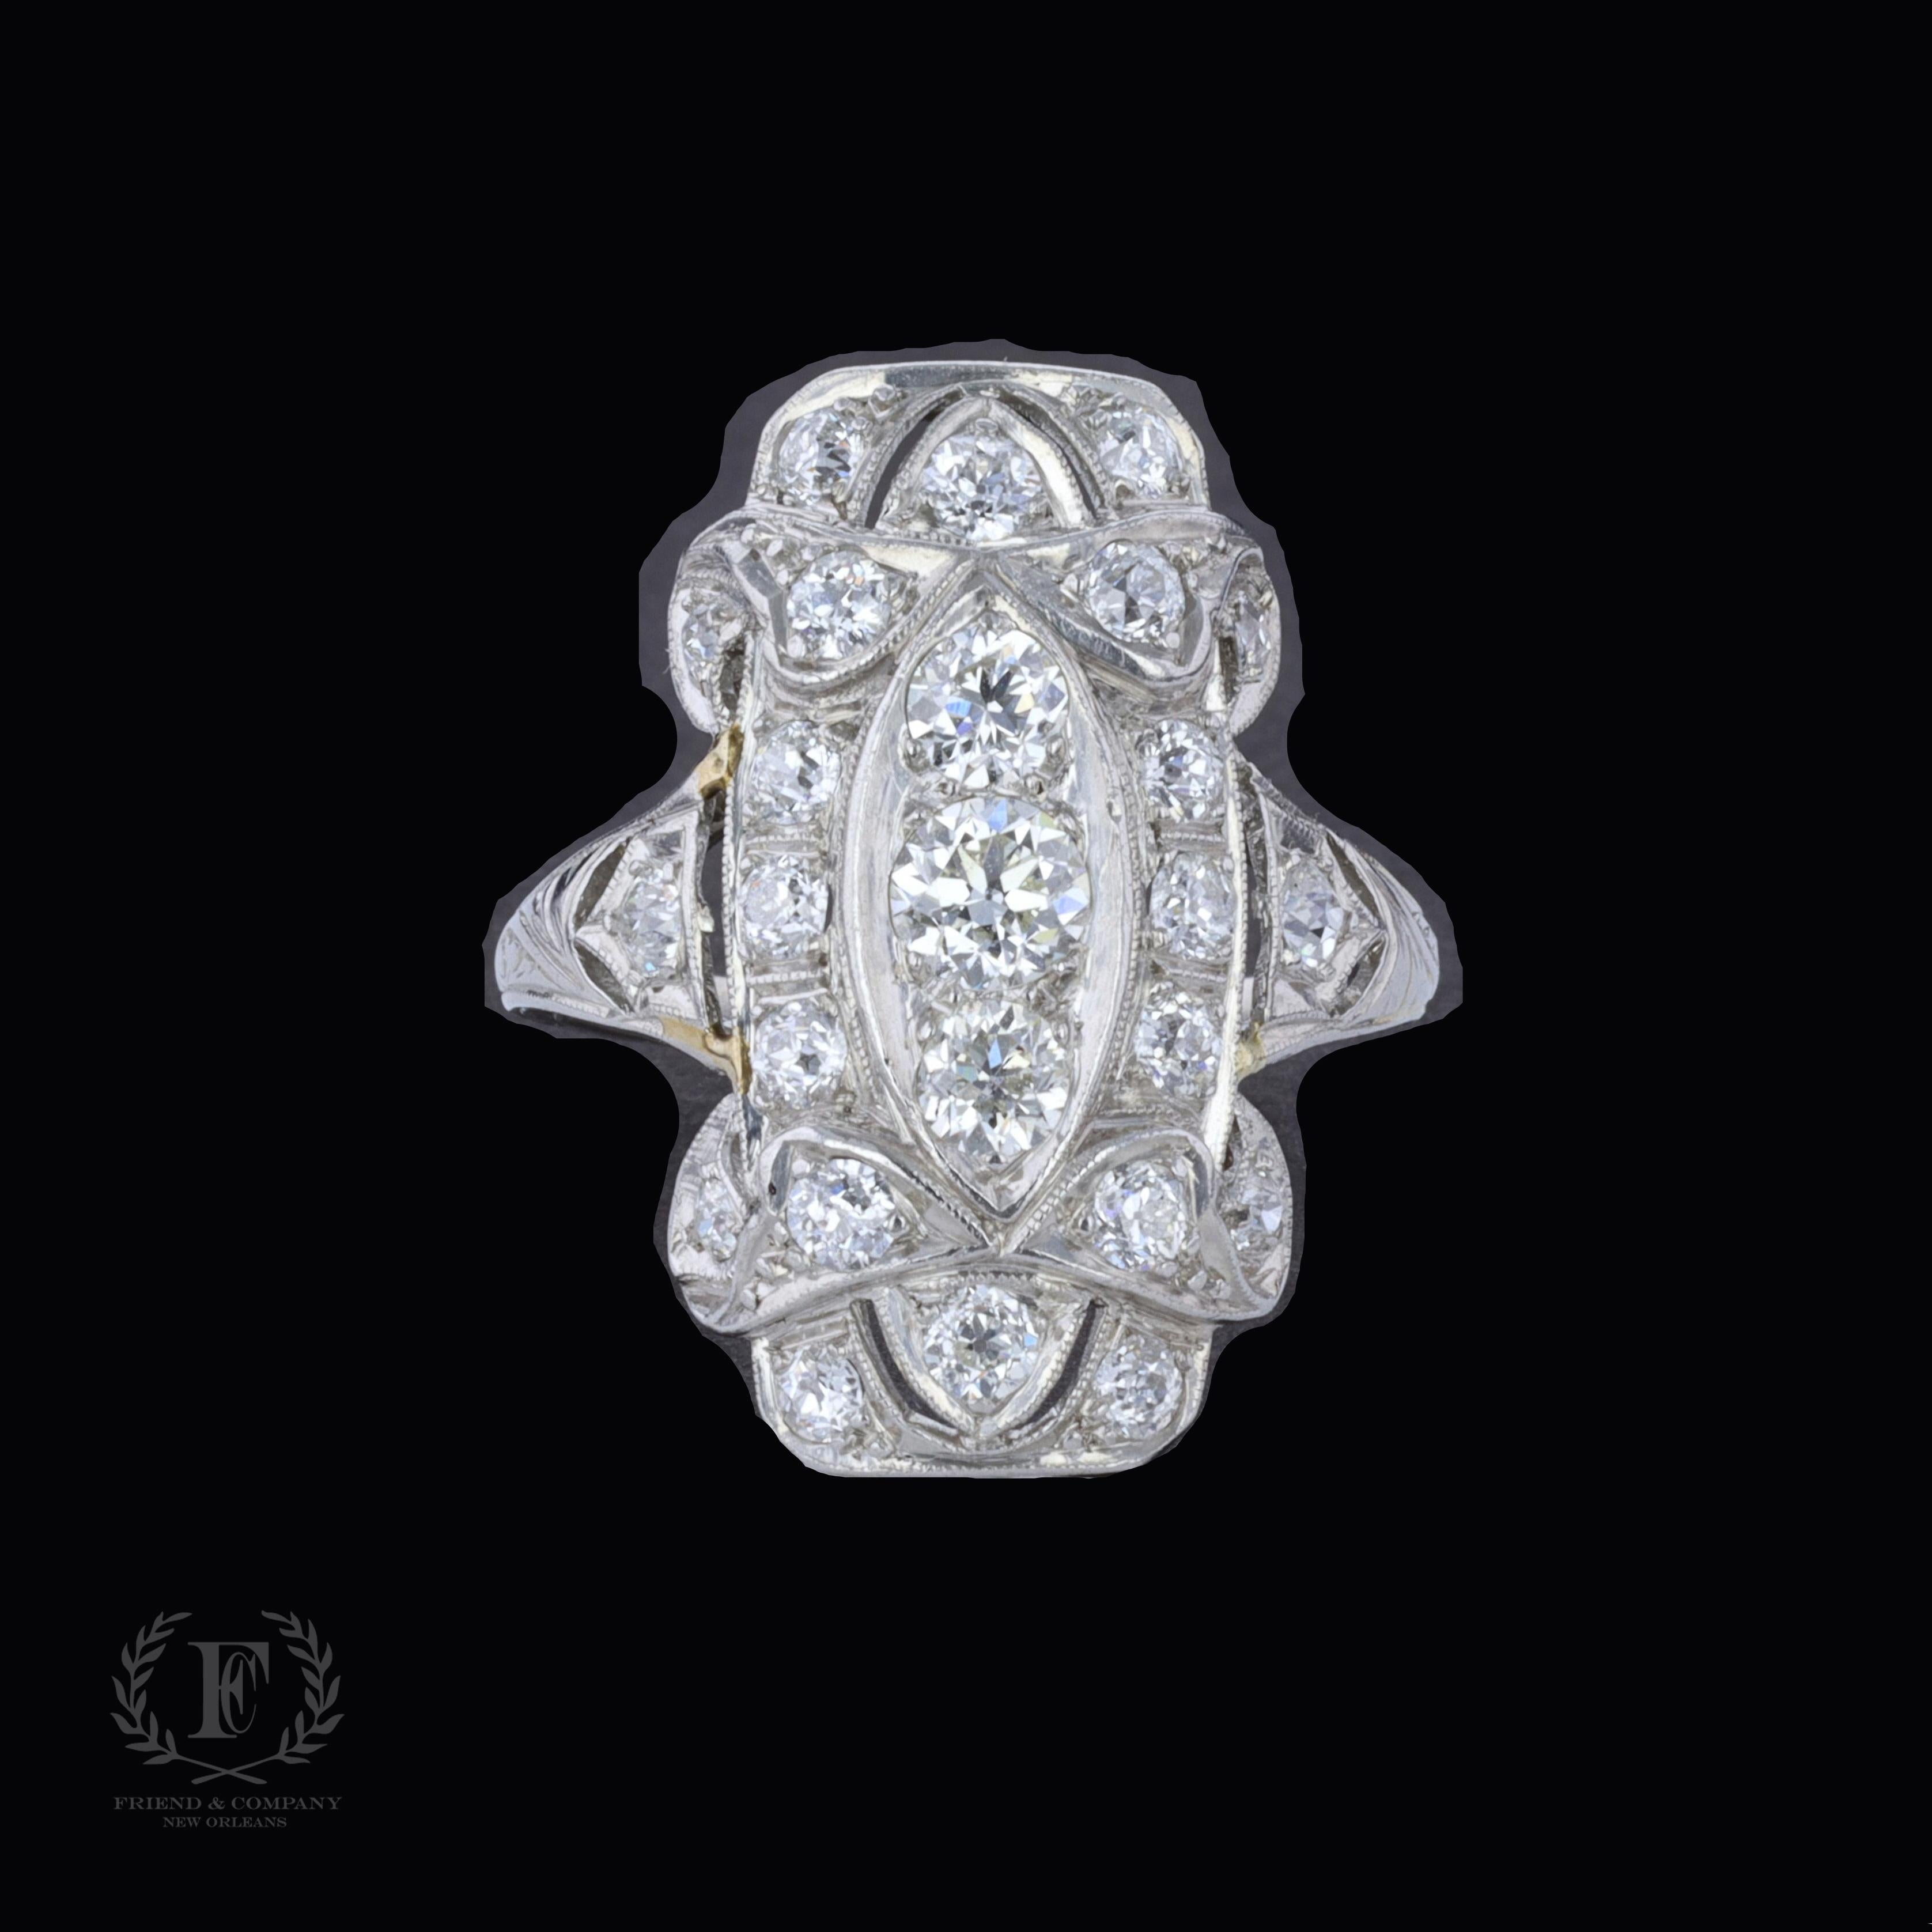 This Art Deco ring is centered with a beautiful old mine cut diamond that weighs approximately 1.03 carats. The color of the diamond is I-J, and the clarity is VS. The center stone is accentuated by two old mine cut diamonds that weigh approximately